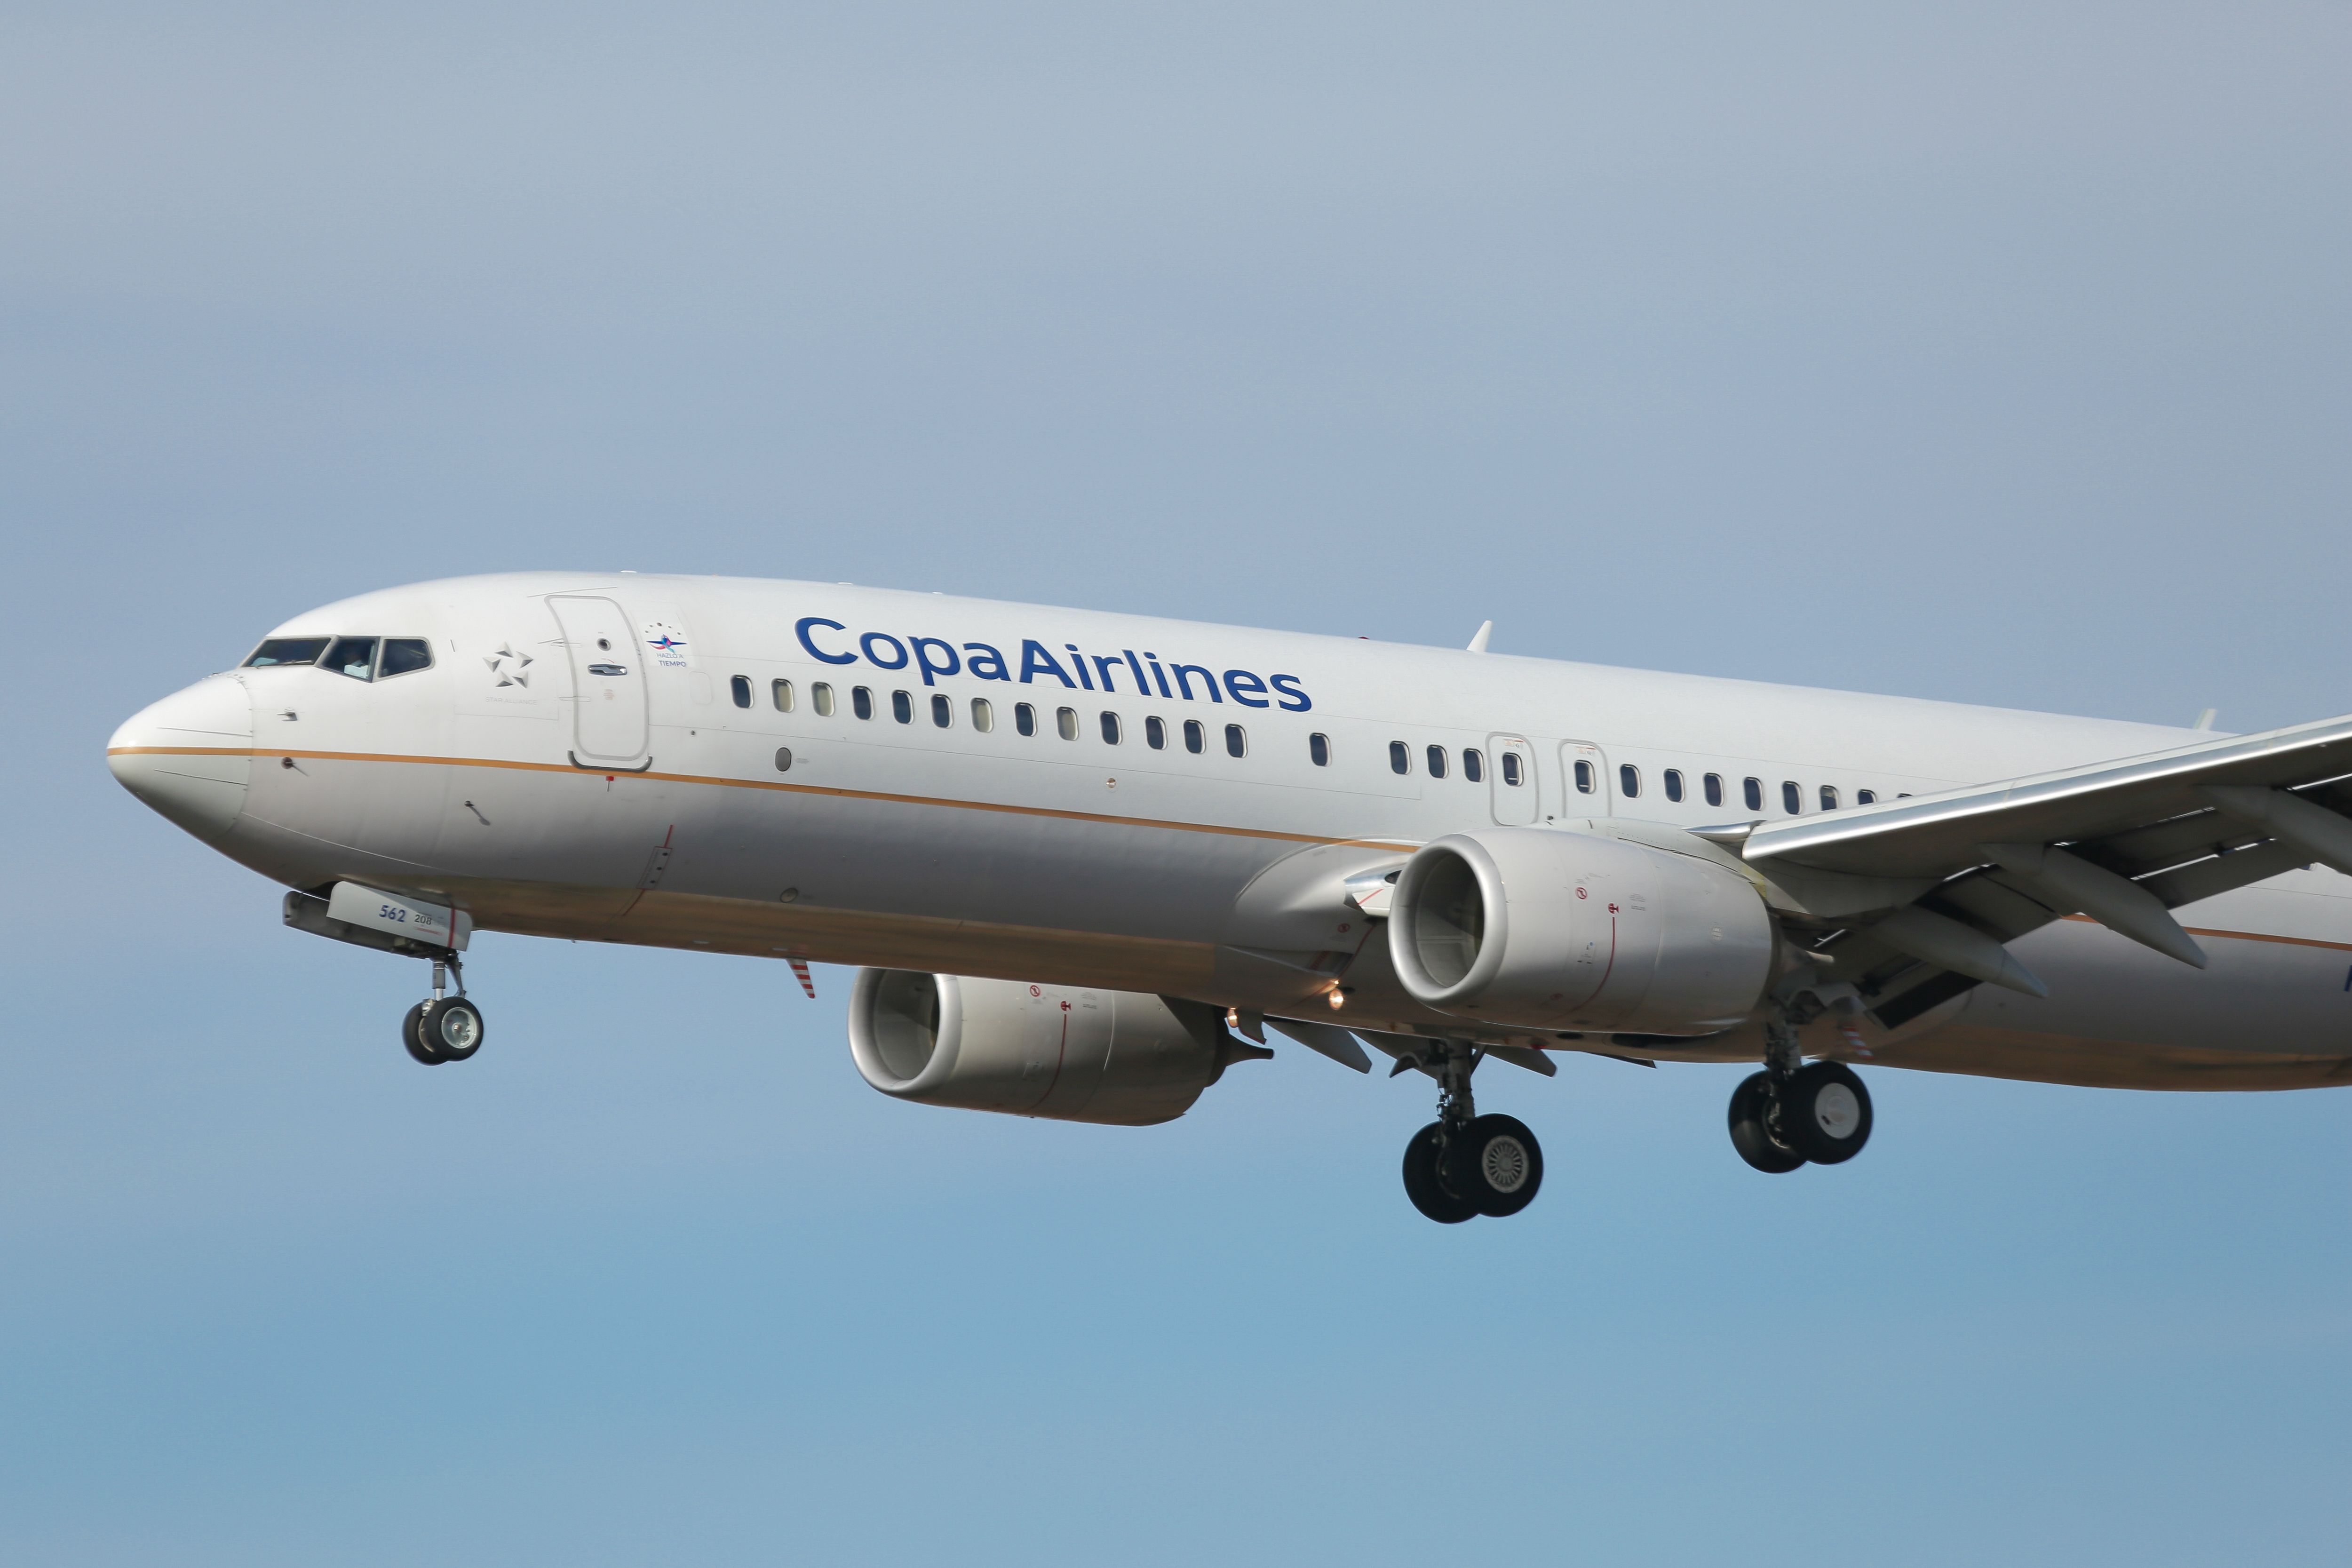 A Copa Airlines aircraft flying